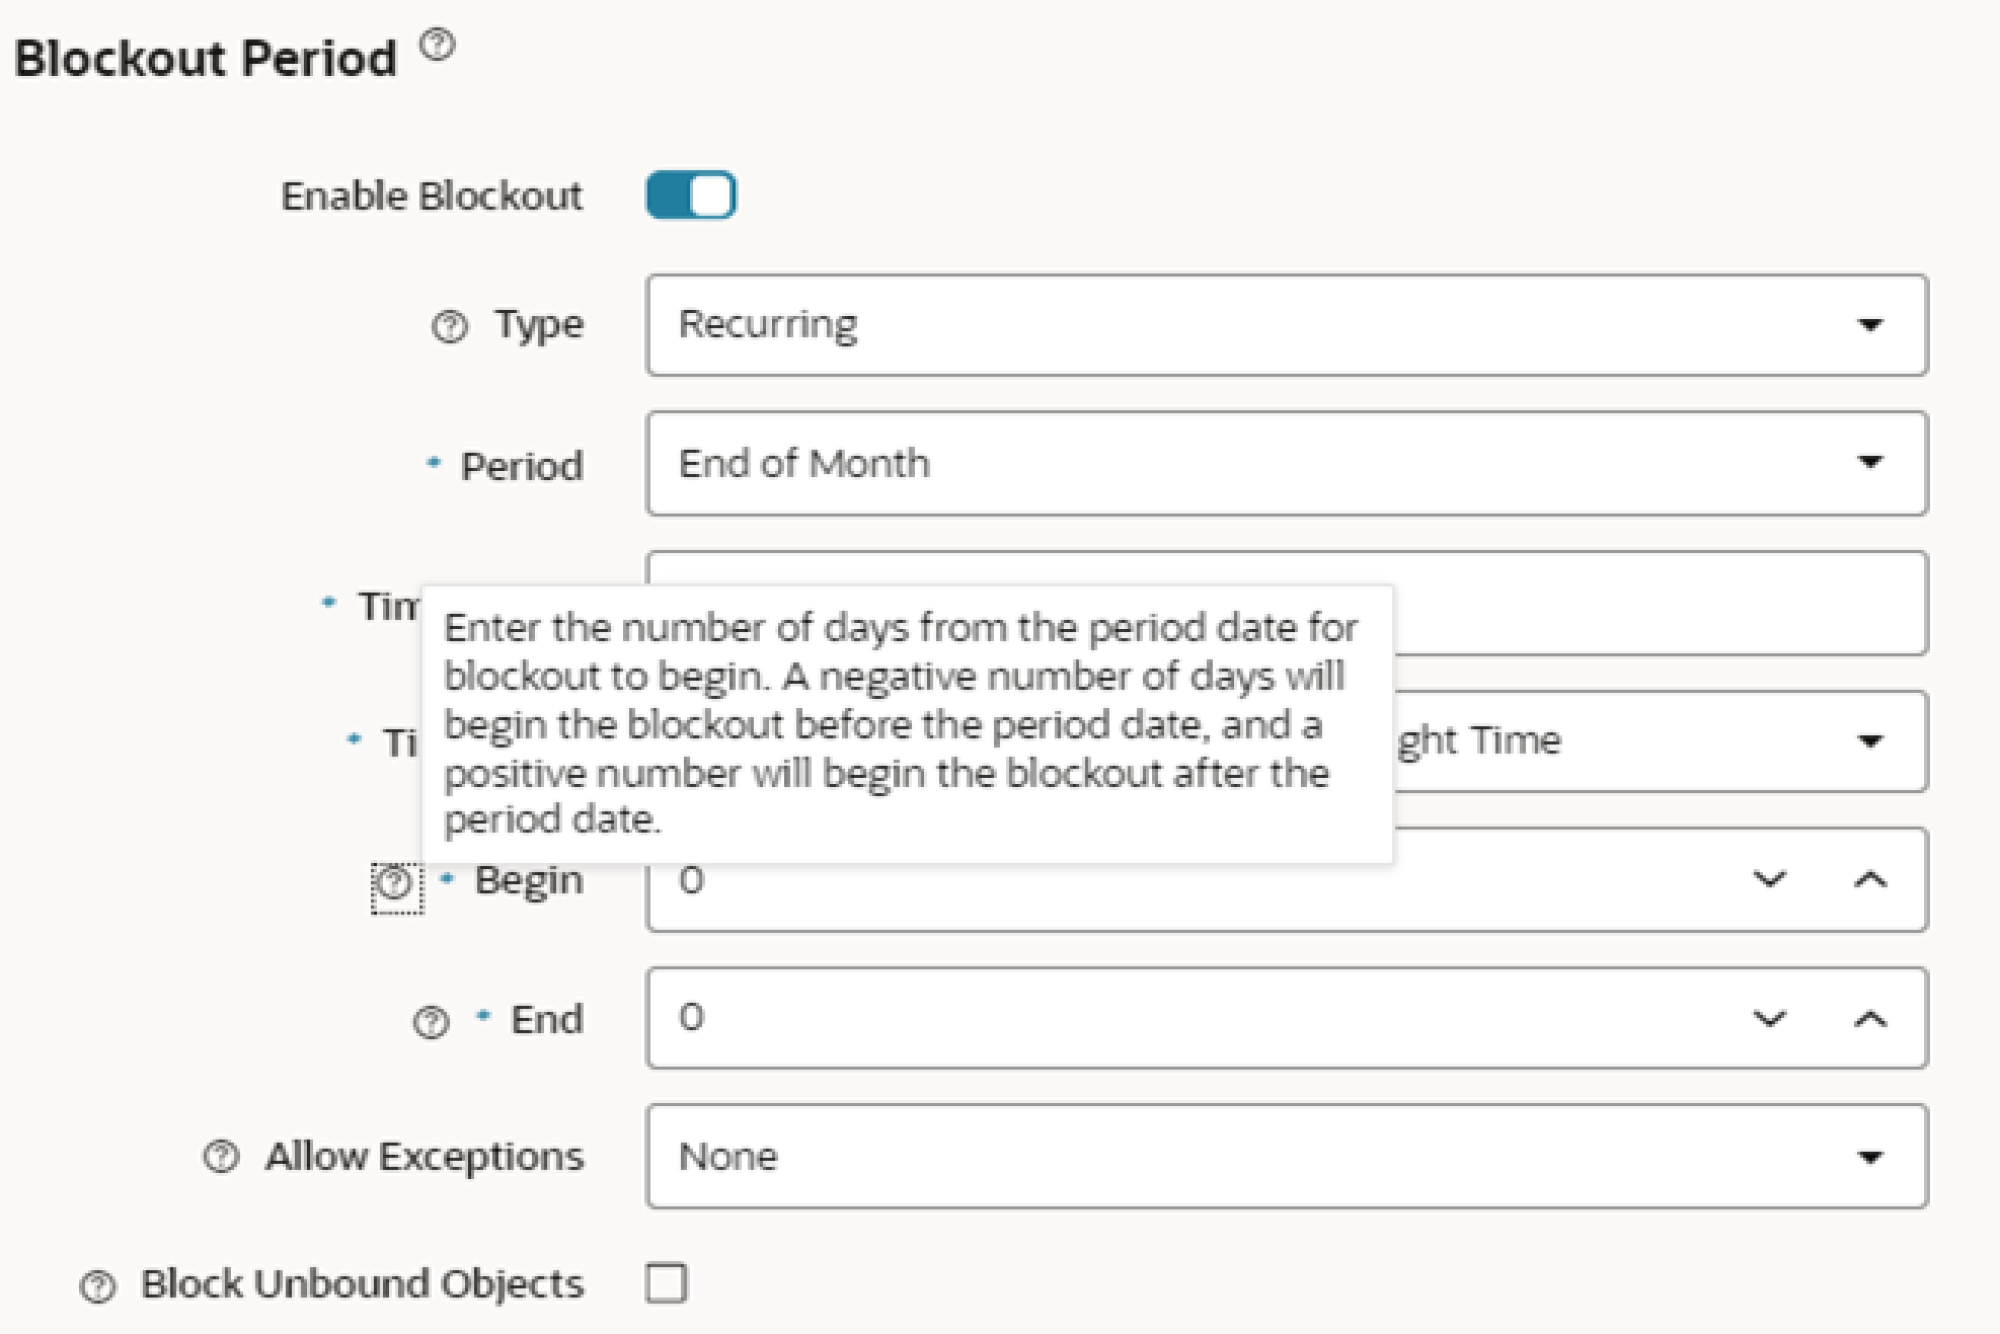 Oracle EDM screenshot showing new recurring blackout period options